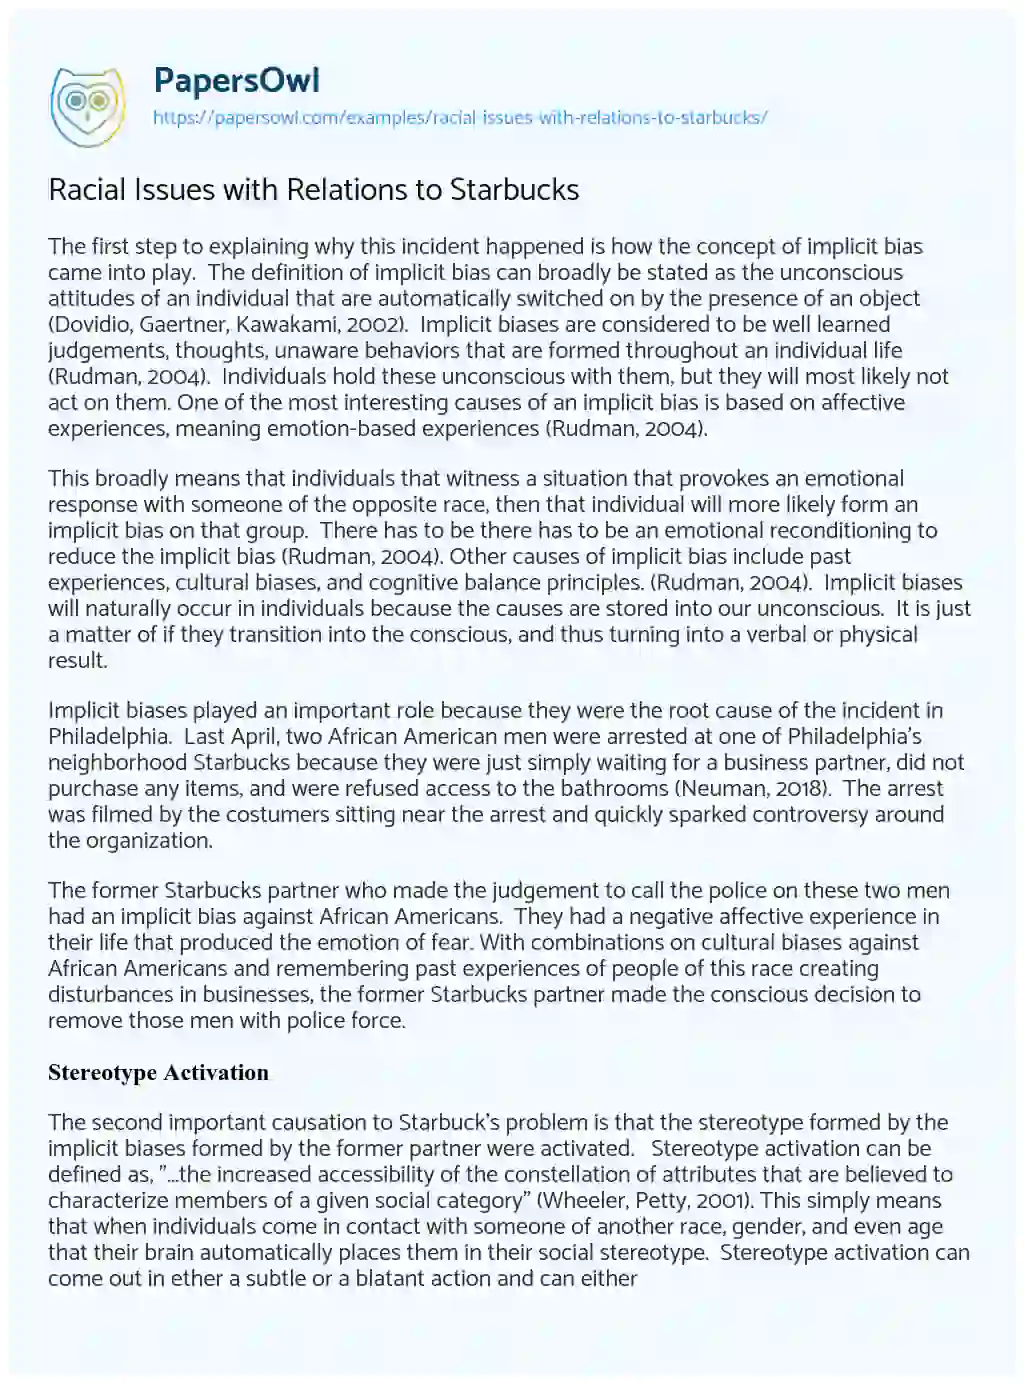 Essay on Racial Issues with Relations to Starbucks